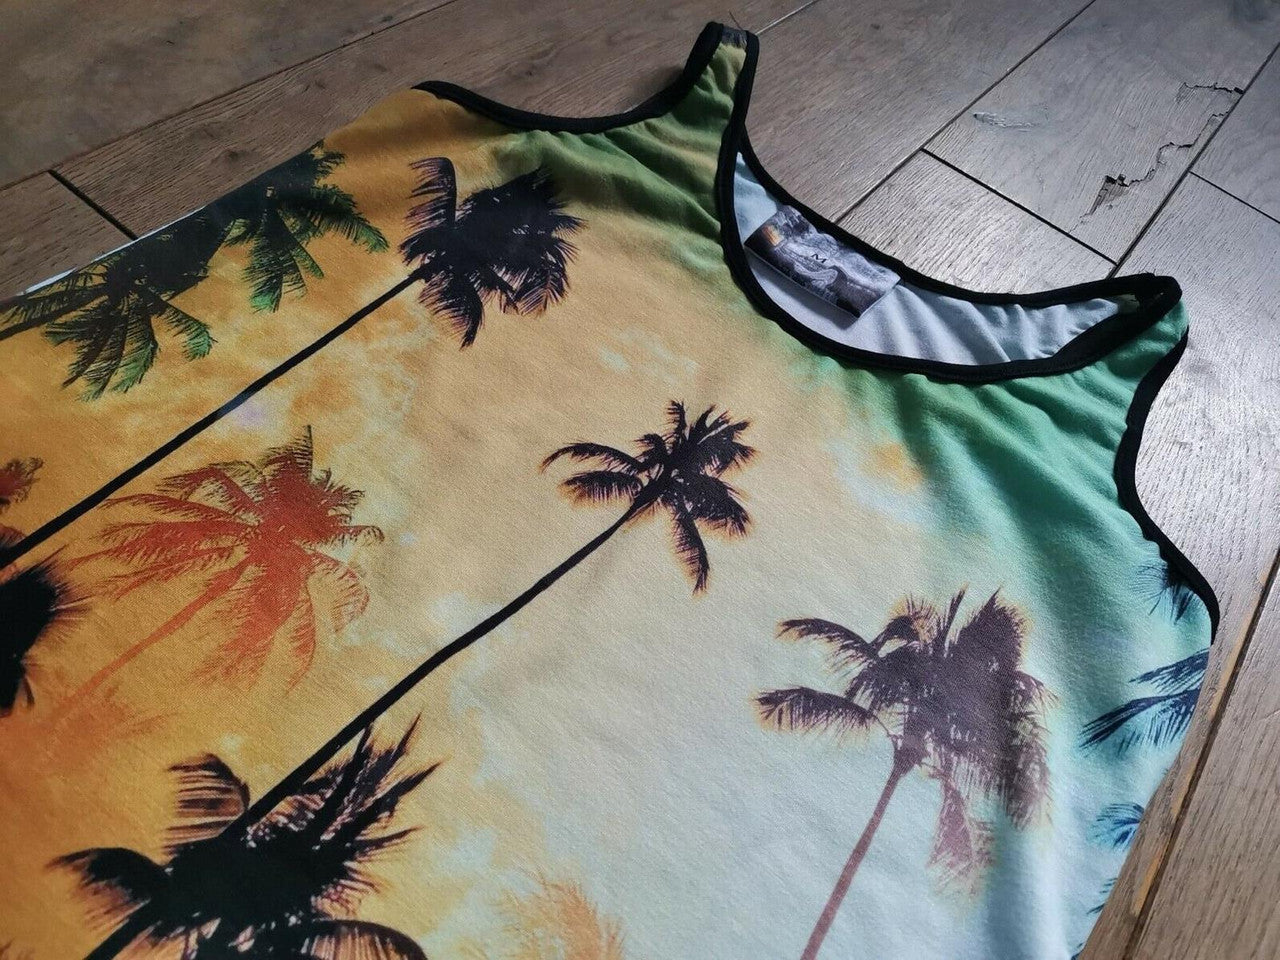 Klaus Sunset KiSS Women’s Fit  Vest - Palm Trees - Hargreeves  Robert Sheehan Inspired - Cosplay - Umbrella Academy - TV Show Number Four 4